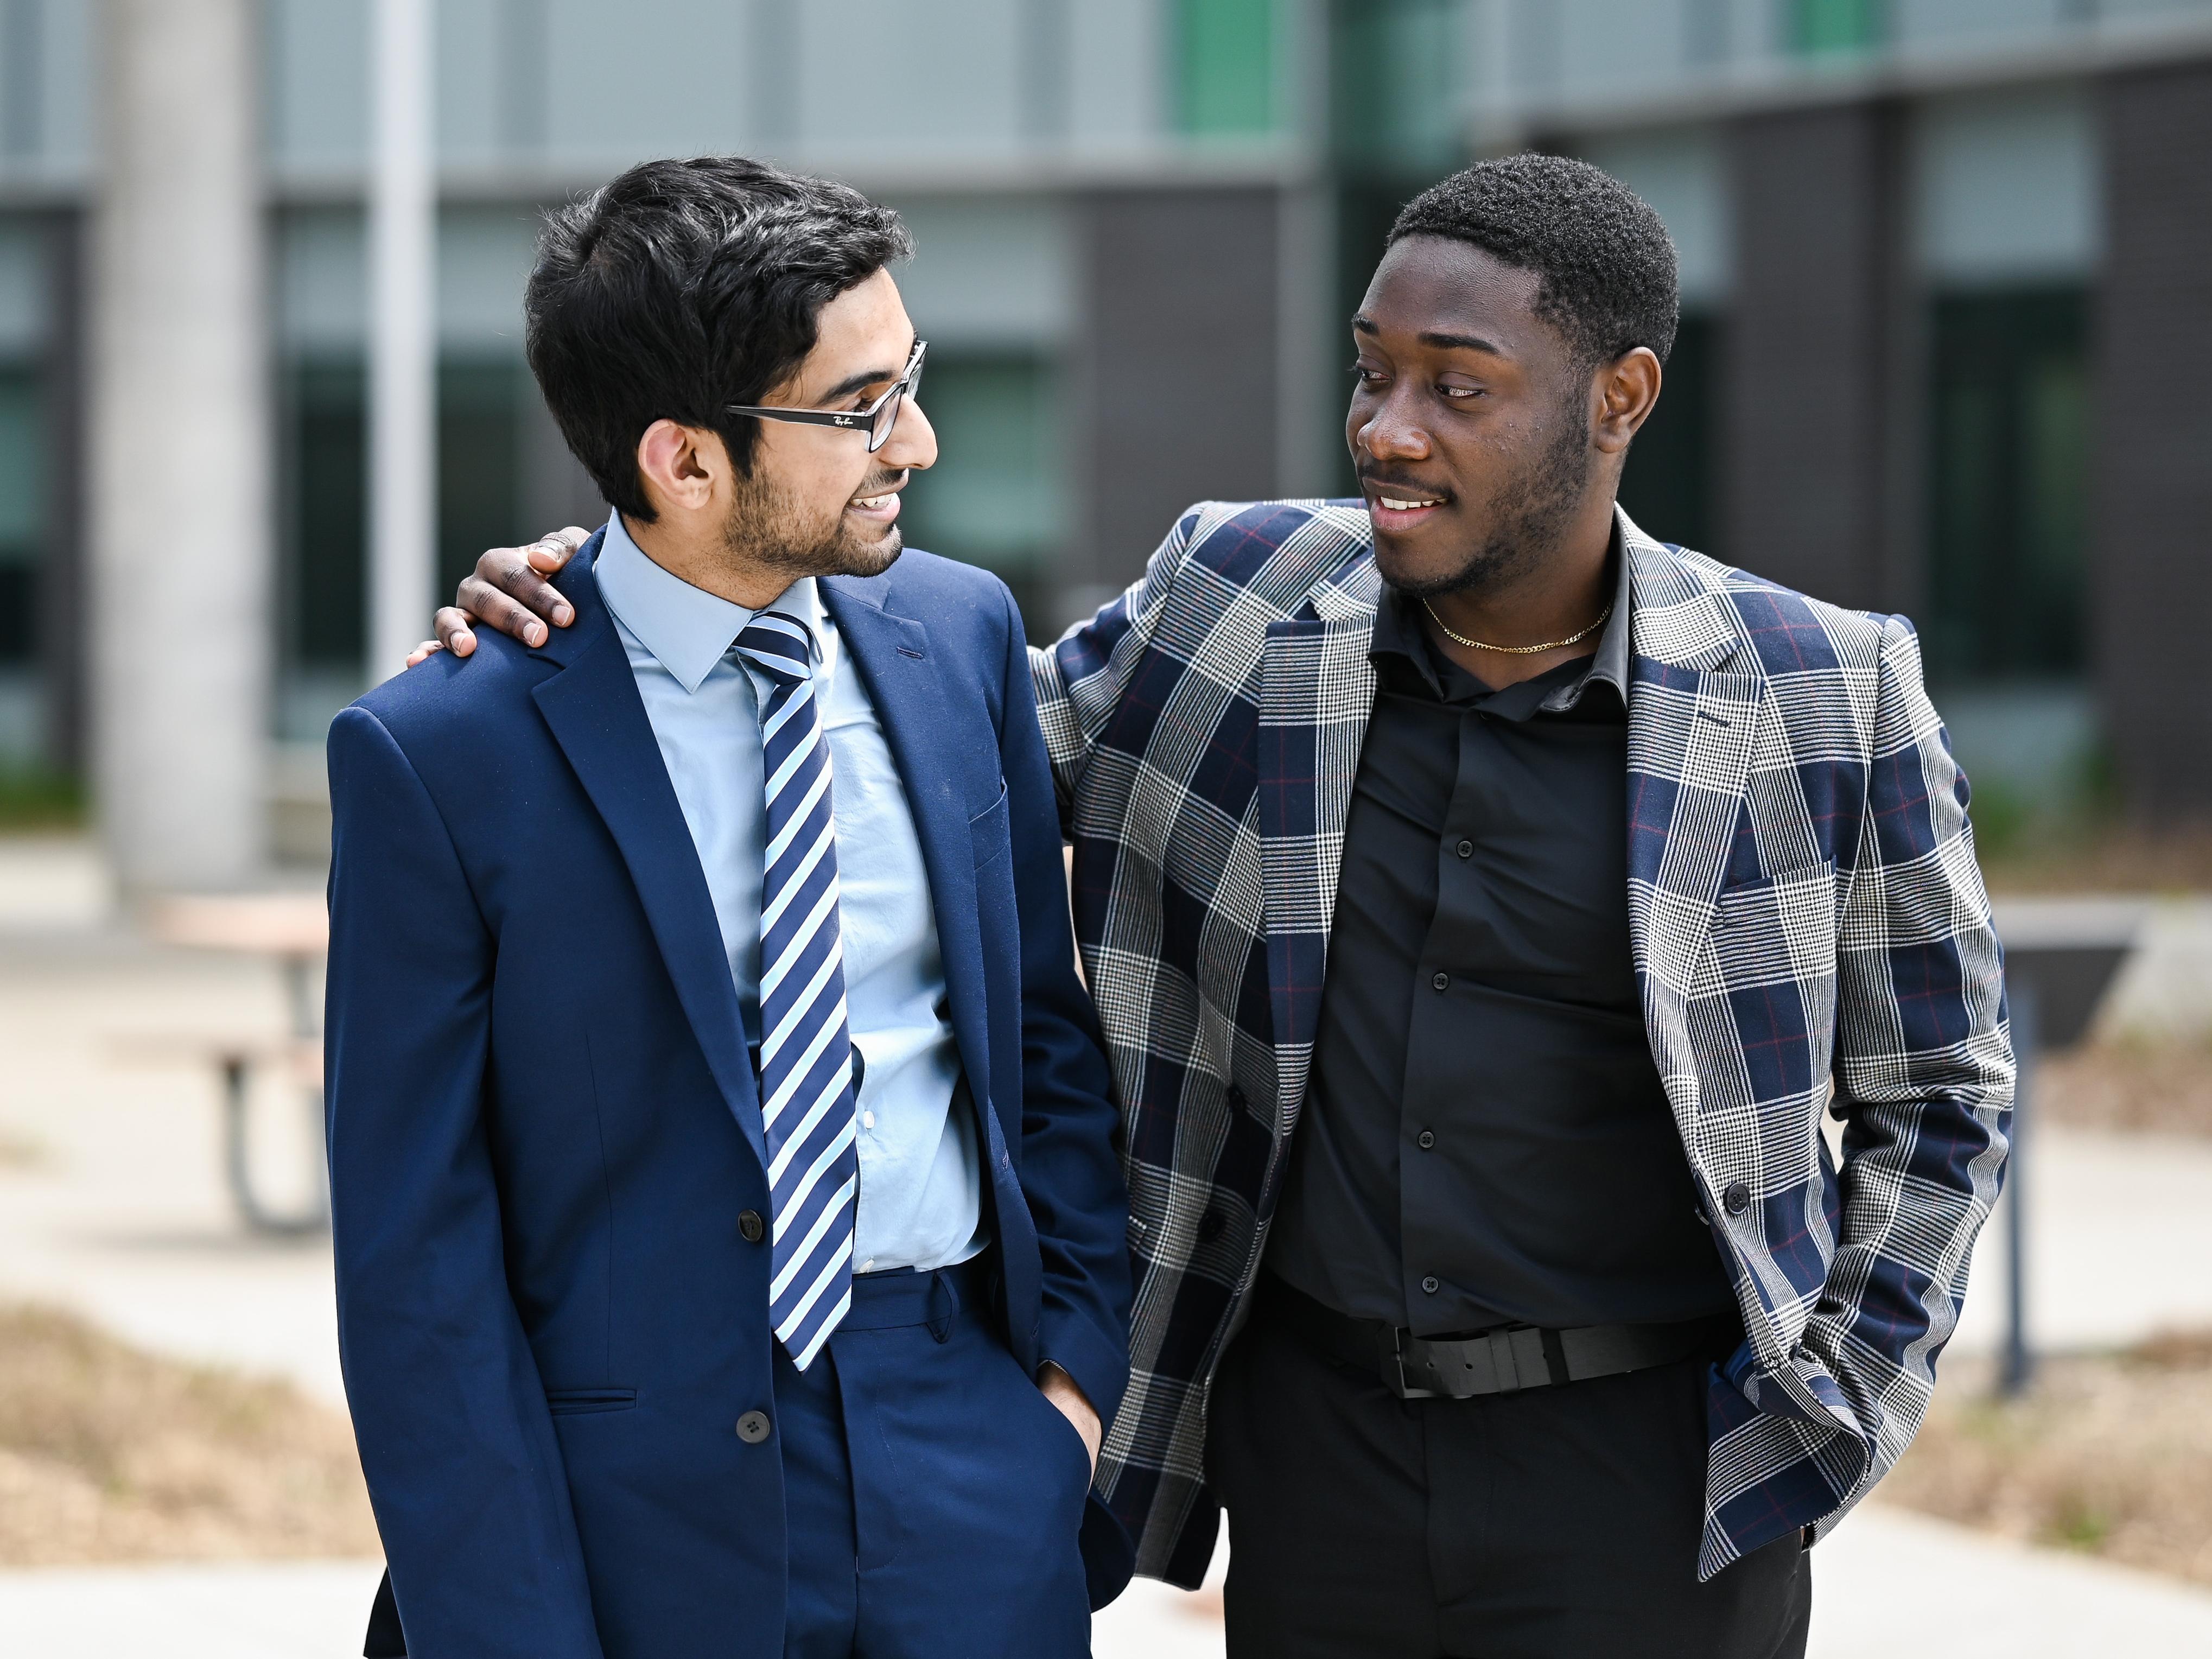 Management students Elvis and Nabeen hanging out on campus.